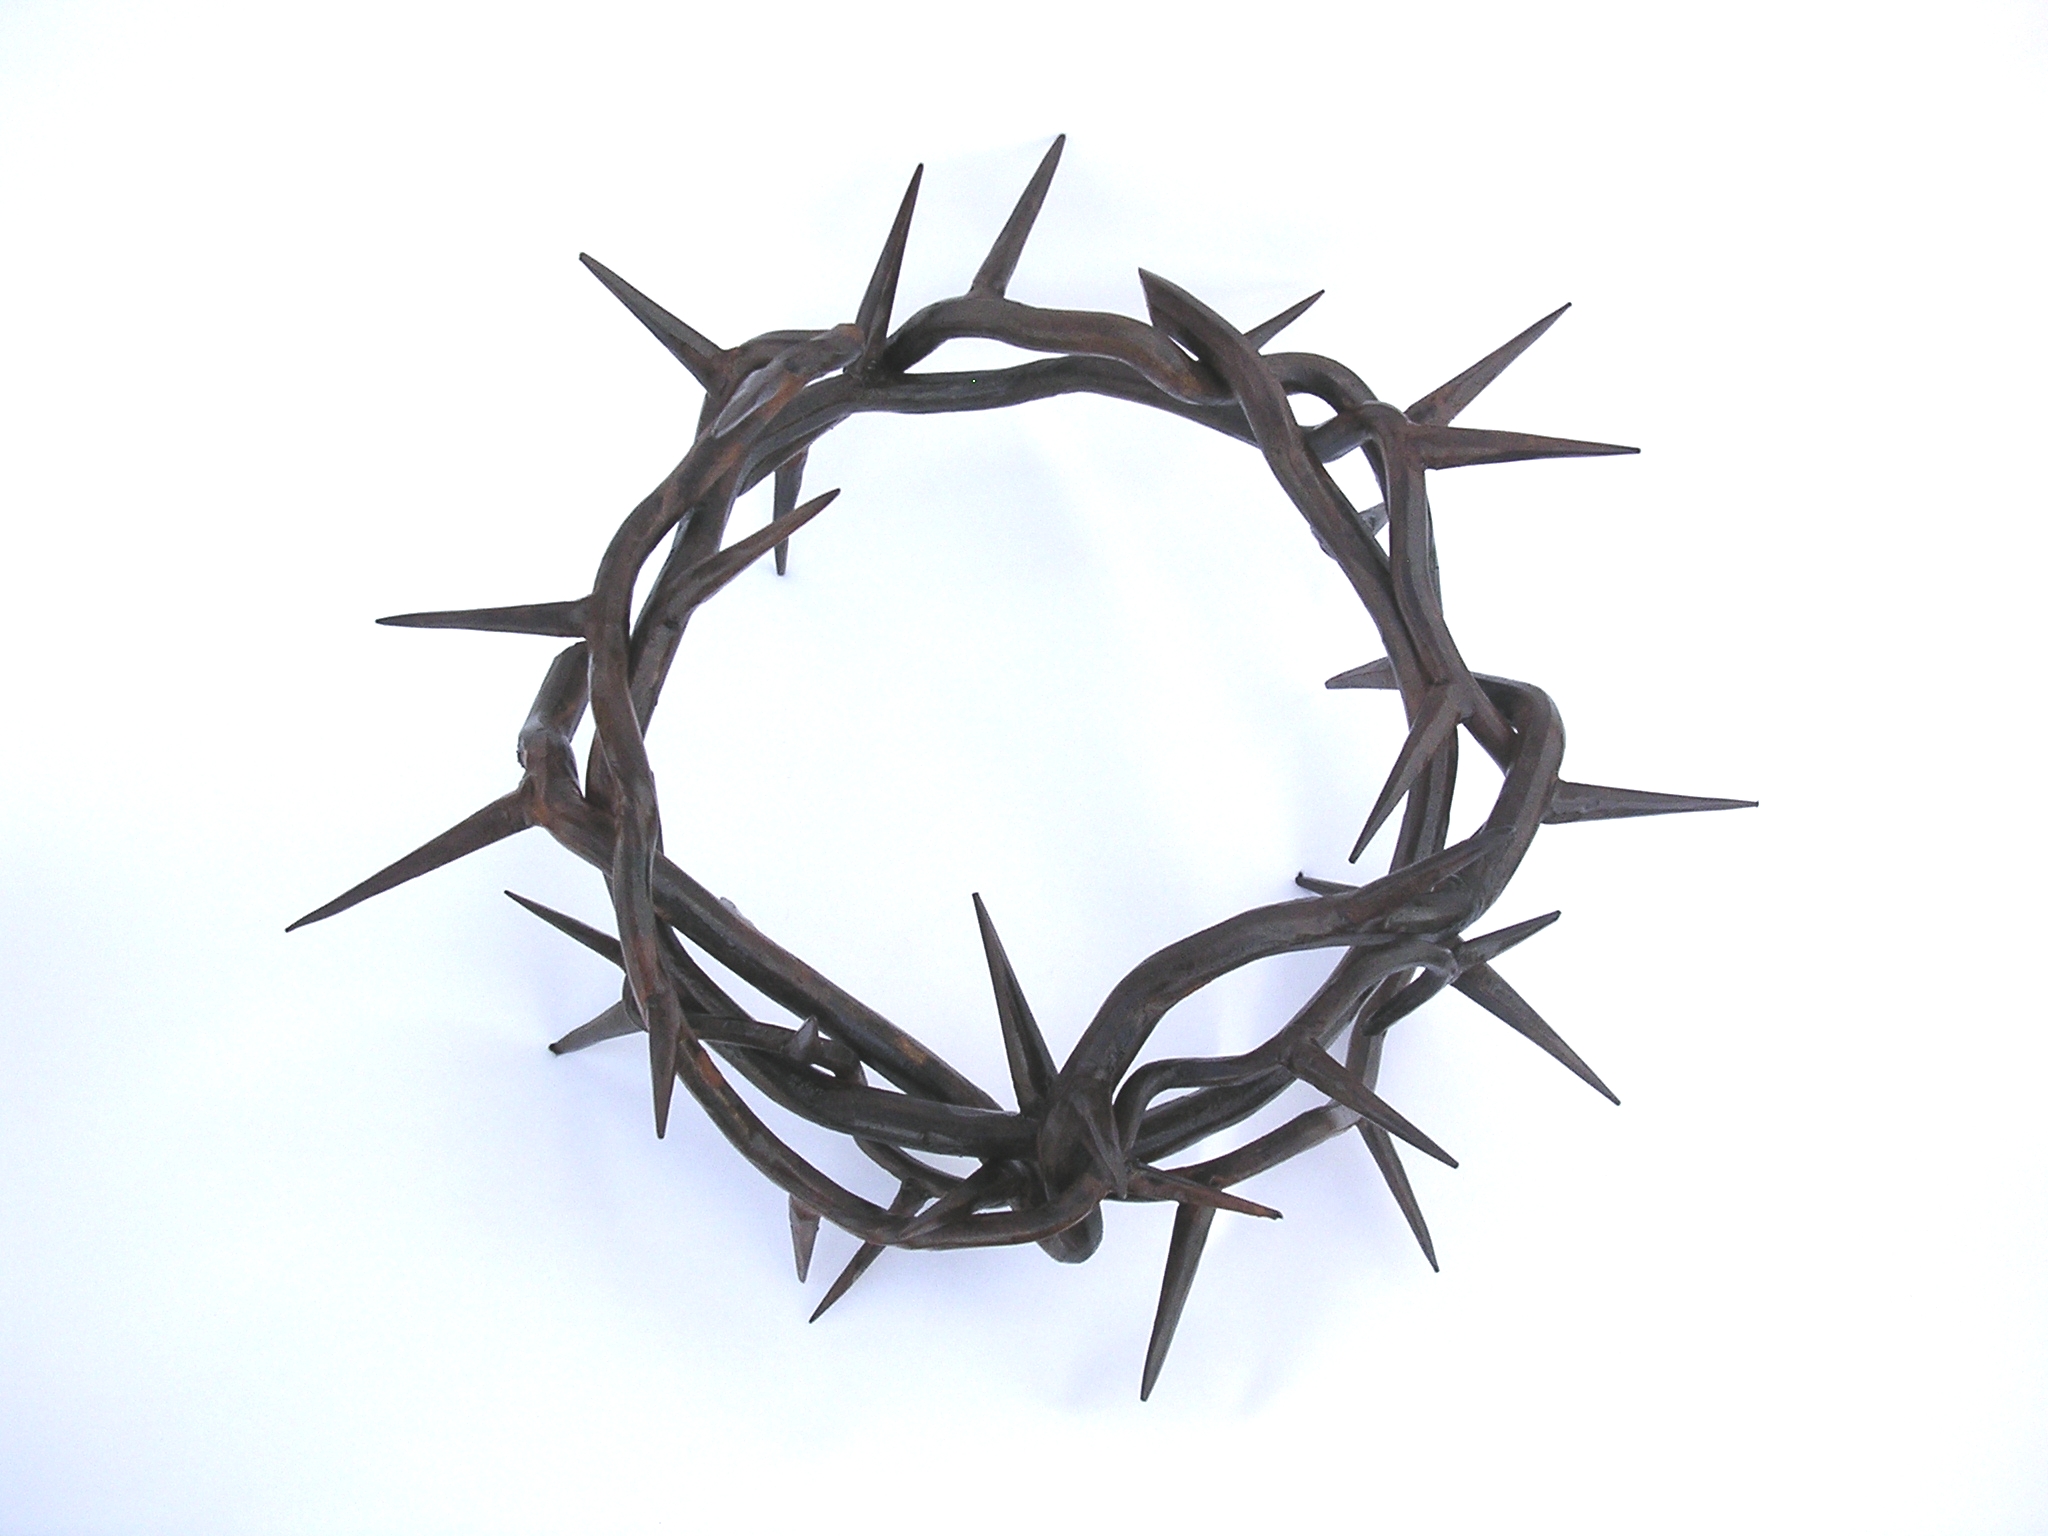 crown of thorns clipart - photo #22